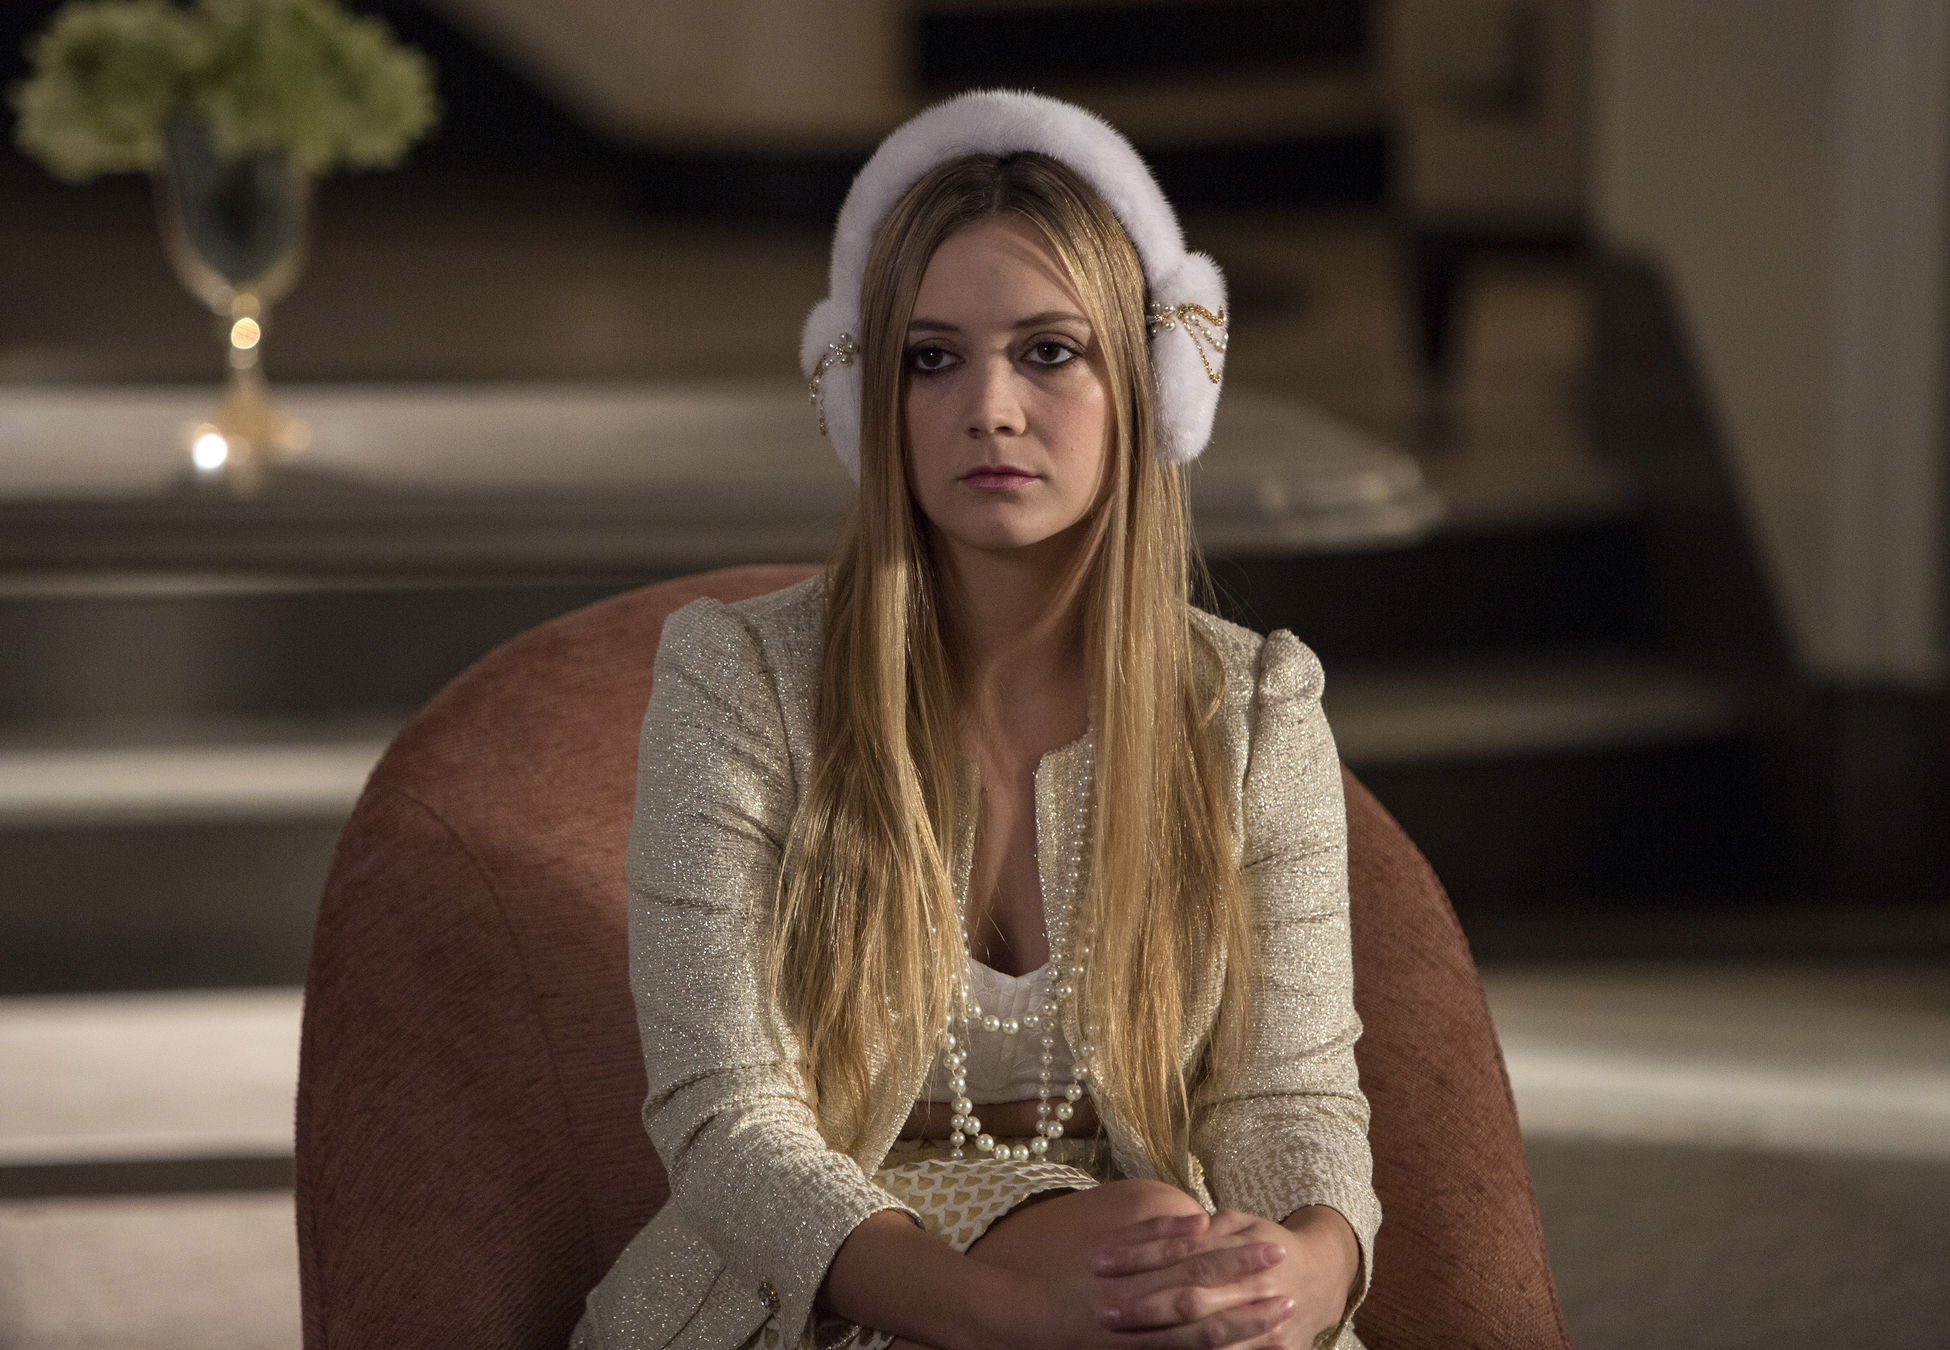 SCREAM QUEENS: Billie Lourd in the "Seven Minutes In Hell" episode of SCREAM QUEENS airing Tuesday, Oct. 20 (9:00-10:00 PM ET/PT) on FOX. ©2015 Fox Broadcasting Co. Cr: Steve Dietl/FOX.